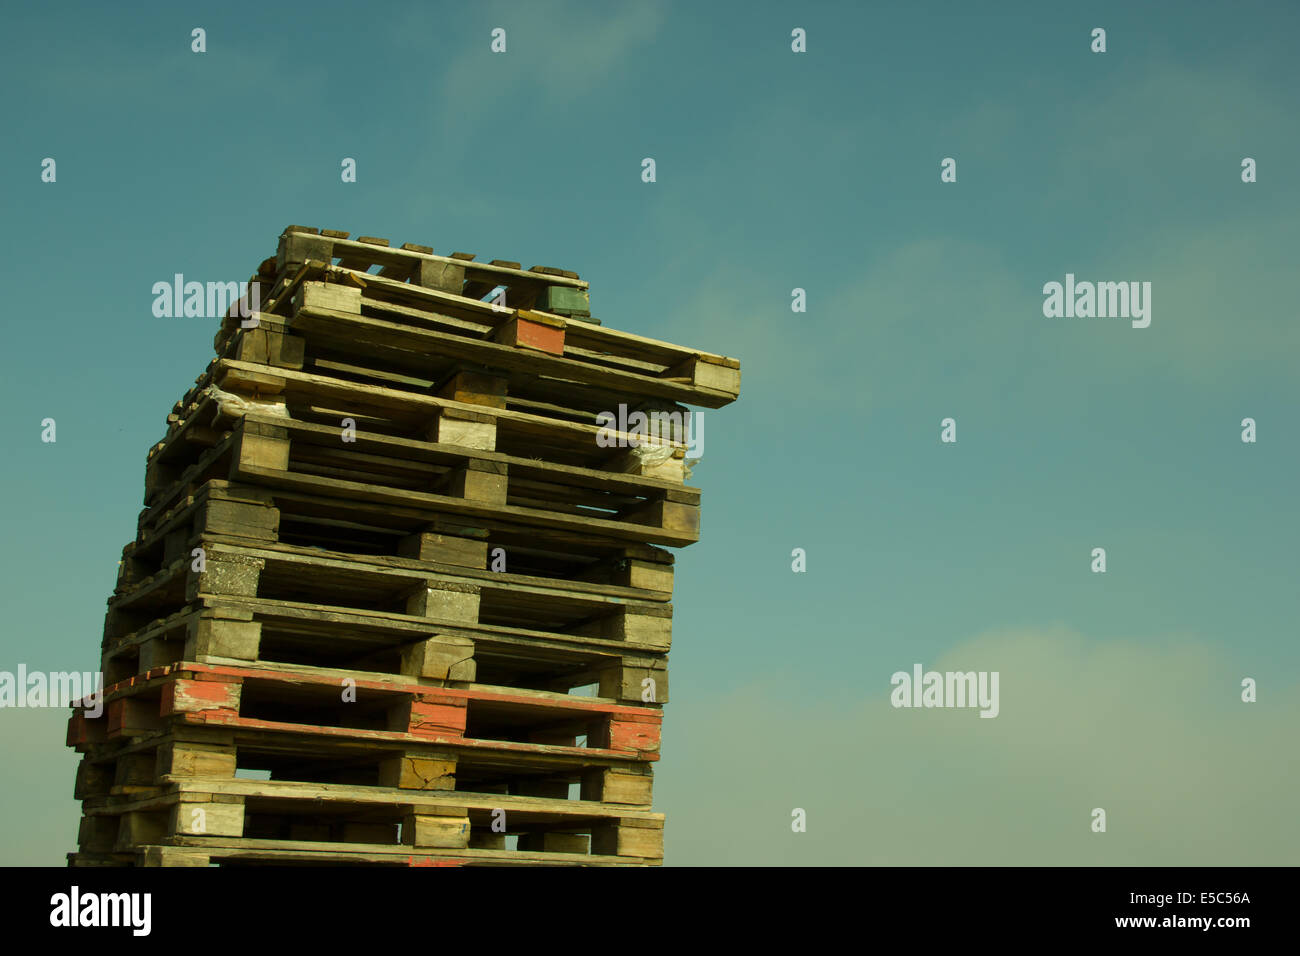 Pile of wood pallets like a tower Stock Photo